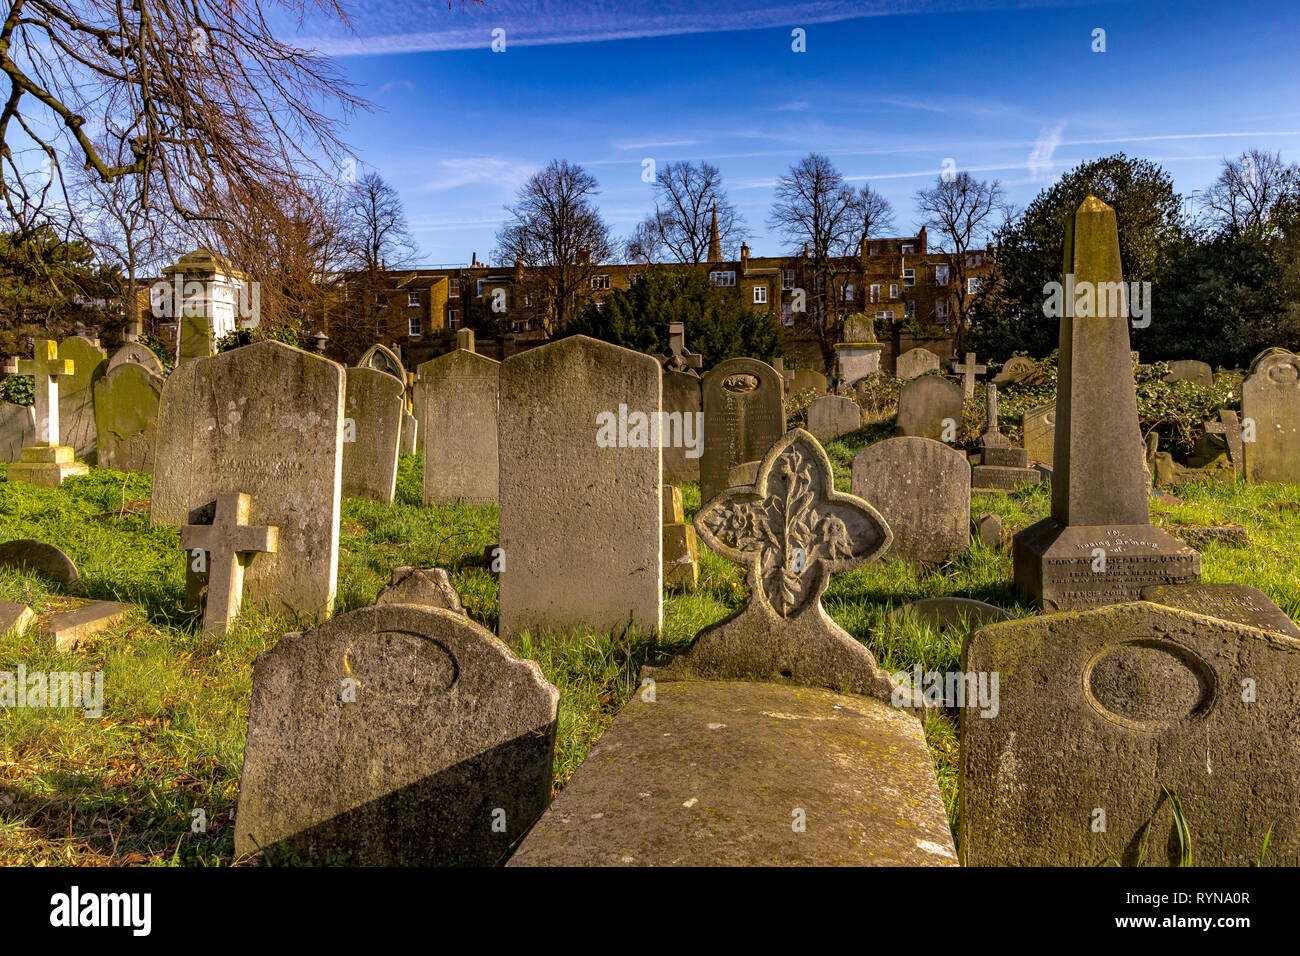 Graves and headstones in Brompton Cemetery in the Royal Borough of Kensington and Chelsea, SW London, managed by The Royal Parks.London ,UK Stock Photo